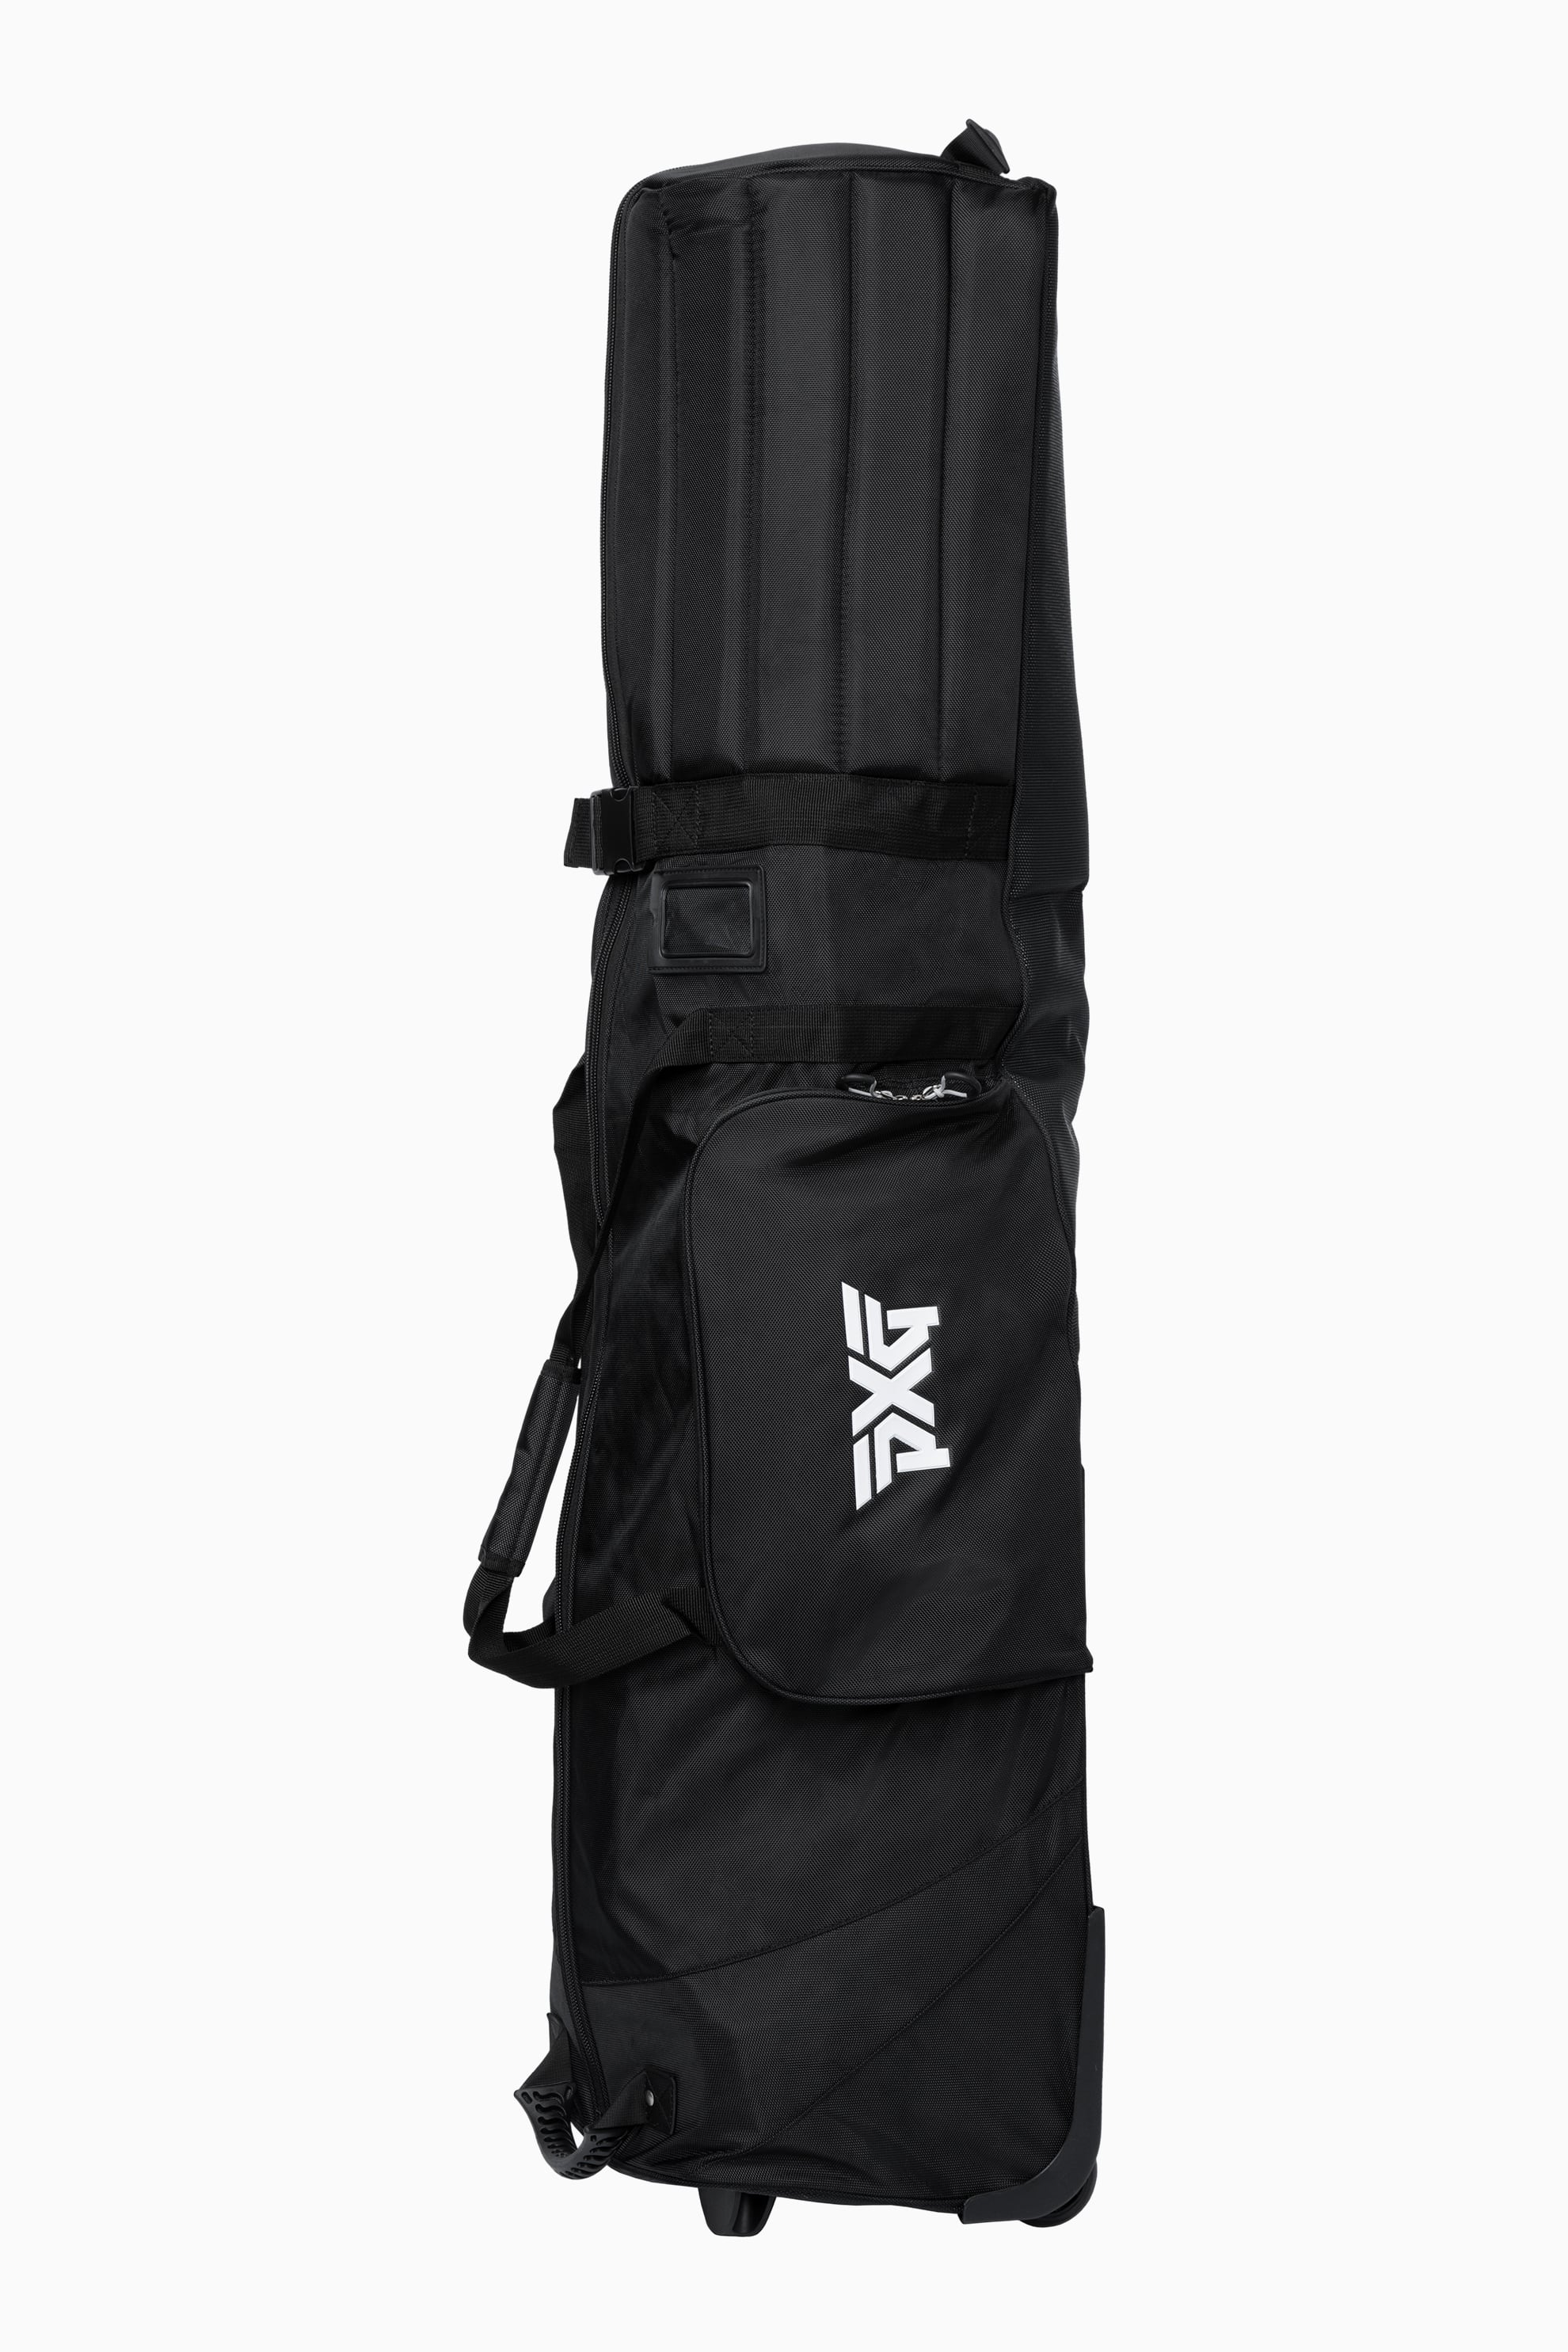 Golf Travel Bags, Golf Travel Case, Luggage & Covers